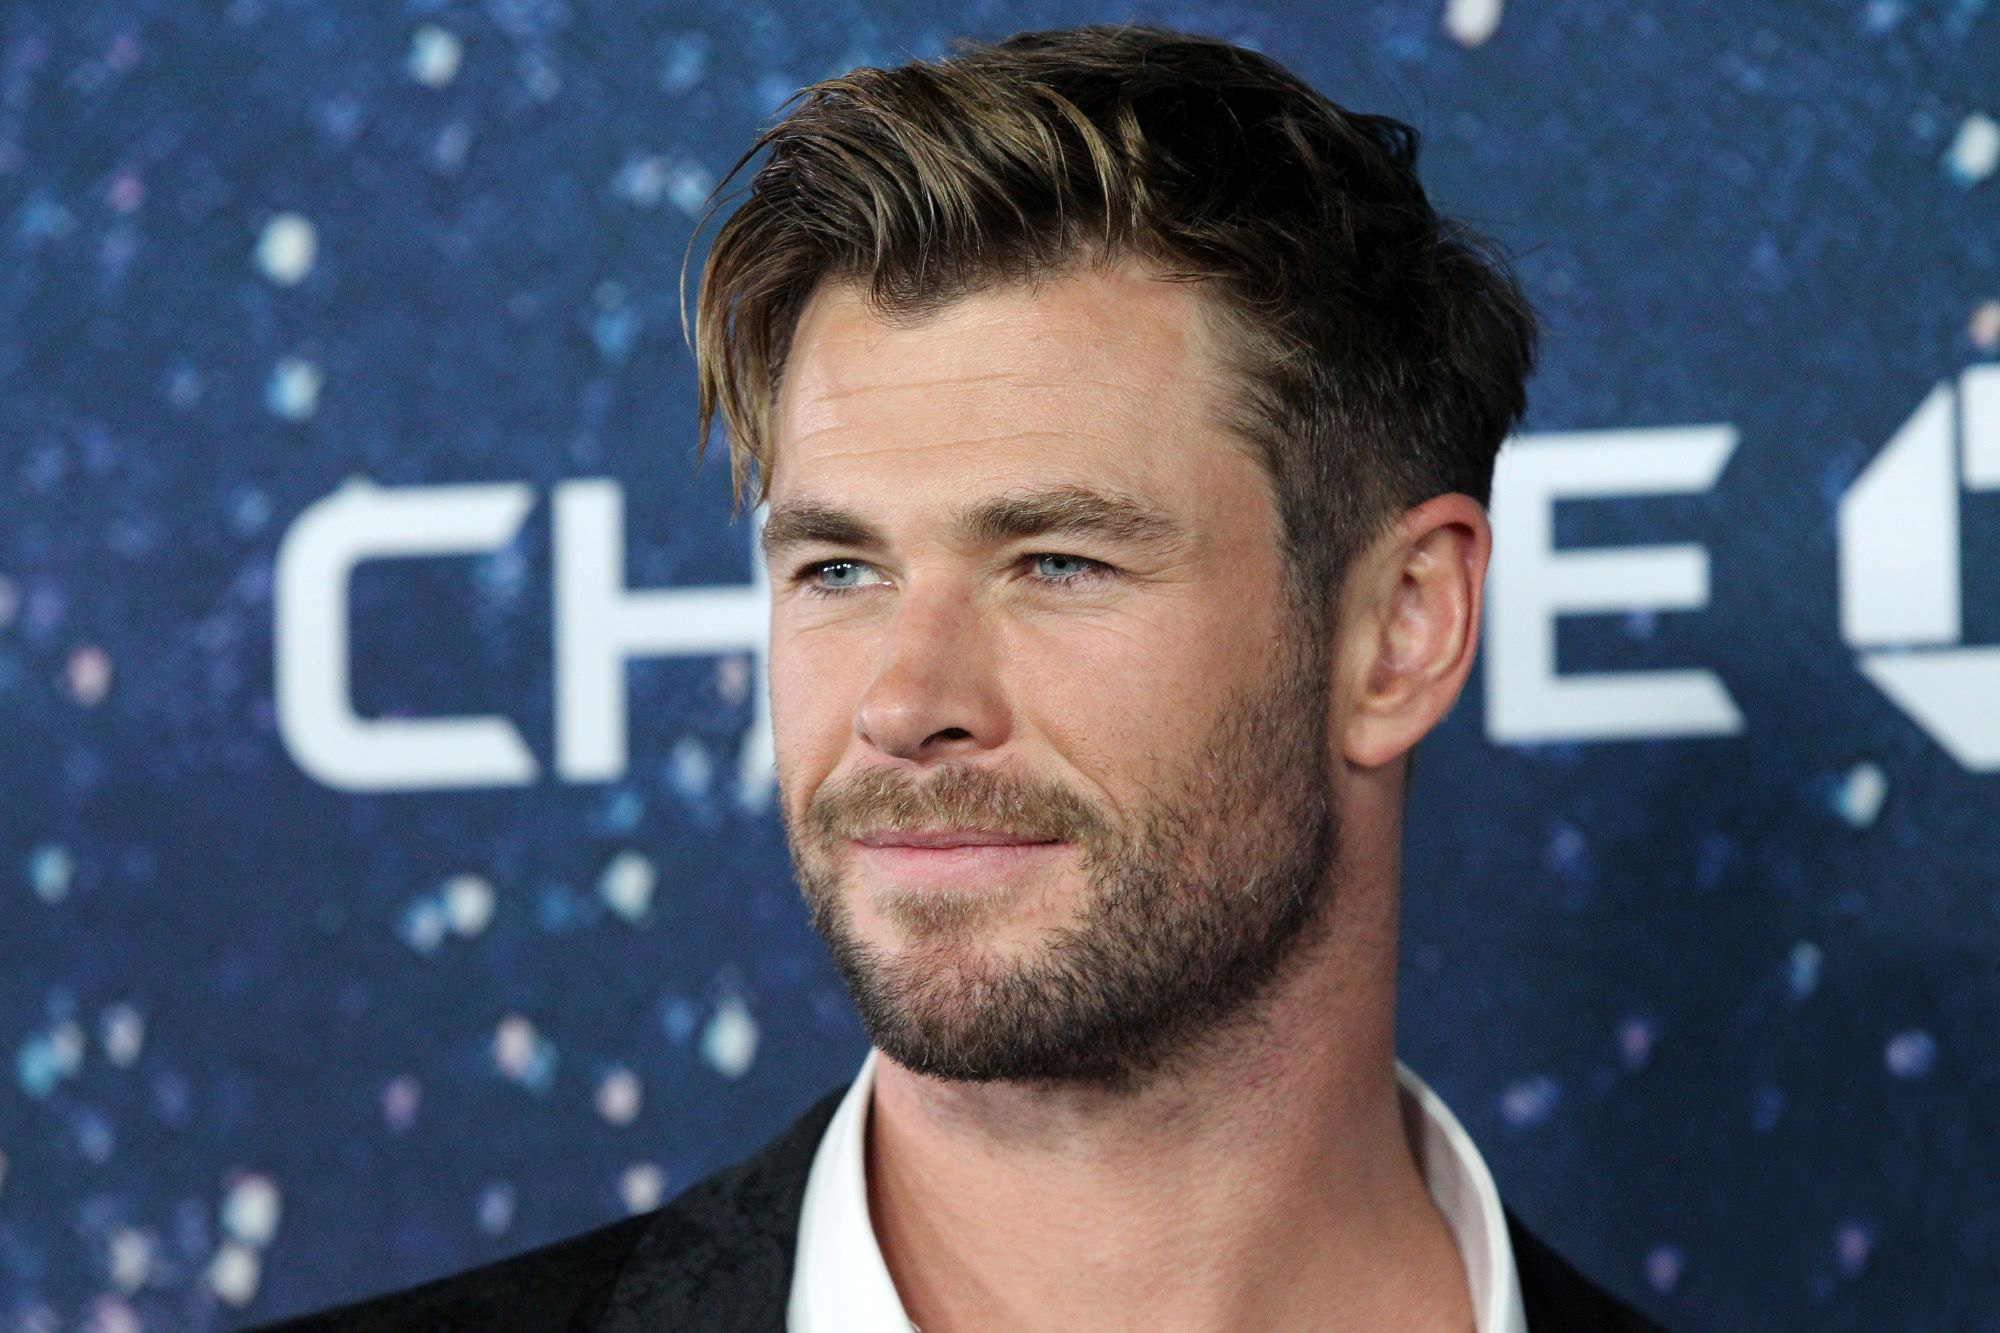 Chris Hemsworth, who stars in 'Thor: Love and Thunder,' wears a black suit over a white collared shirt.